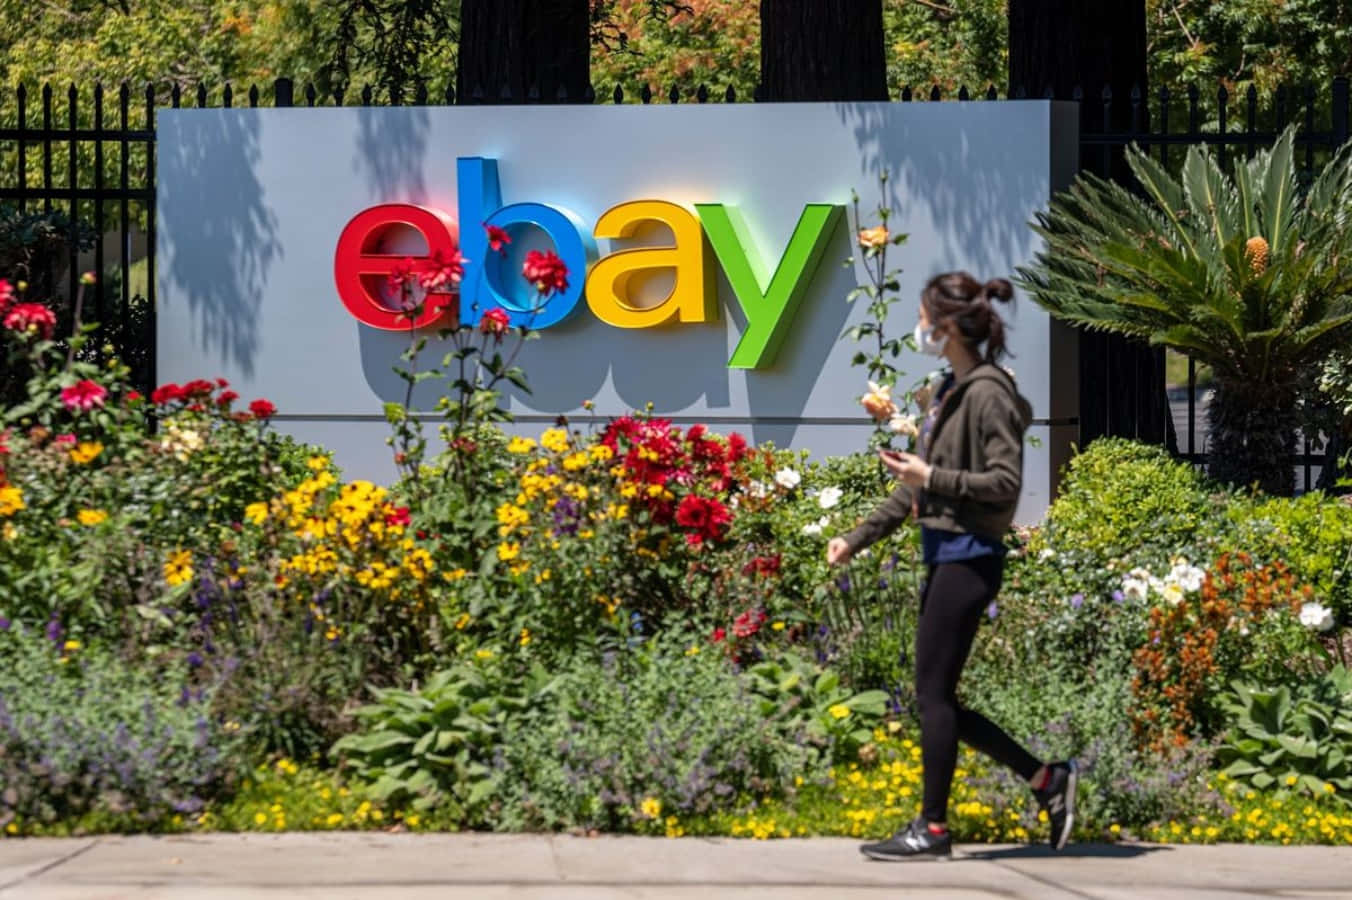 Shop from millions of items from the world’s largest online marketplace, ebay.